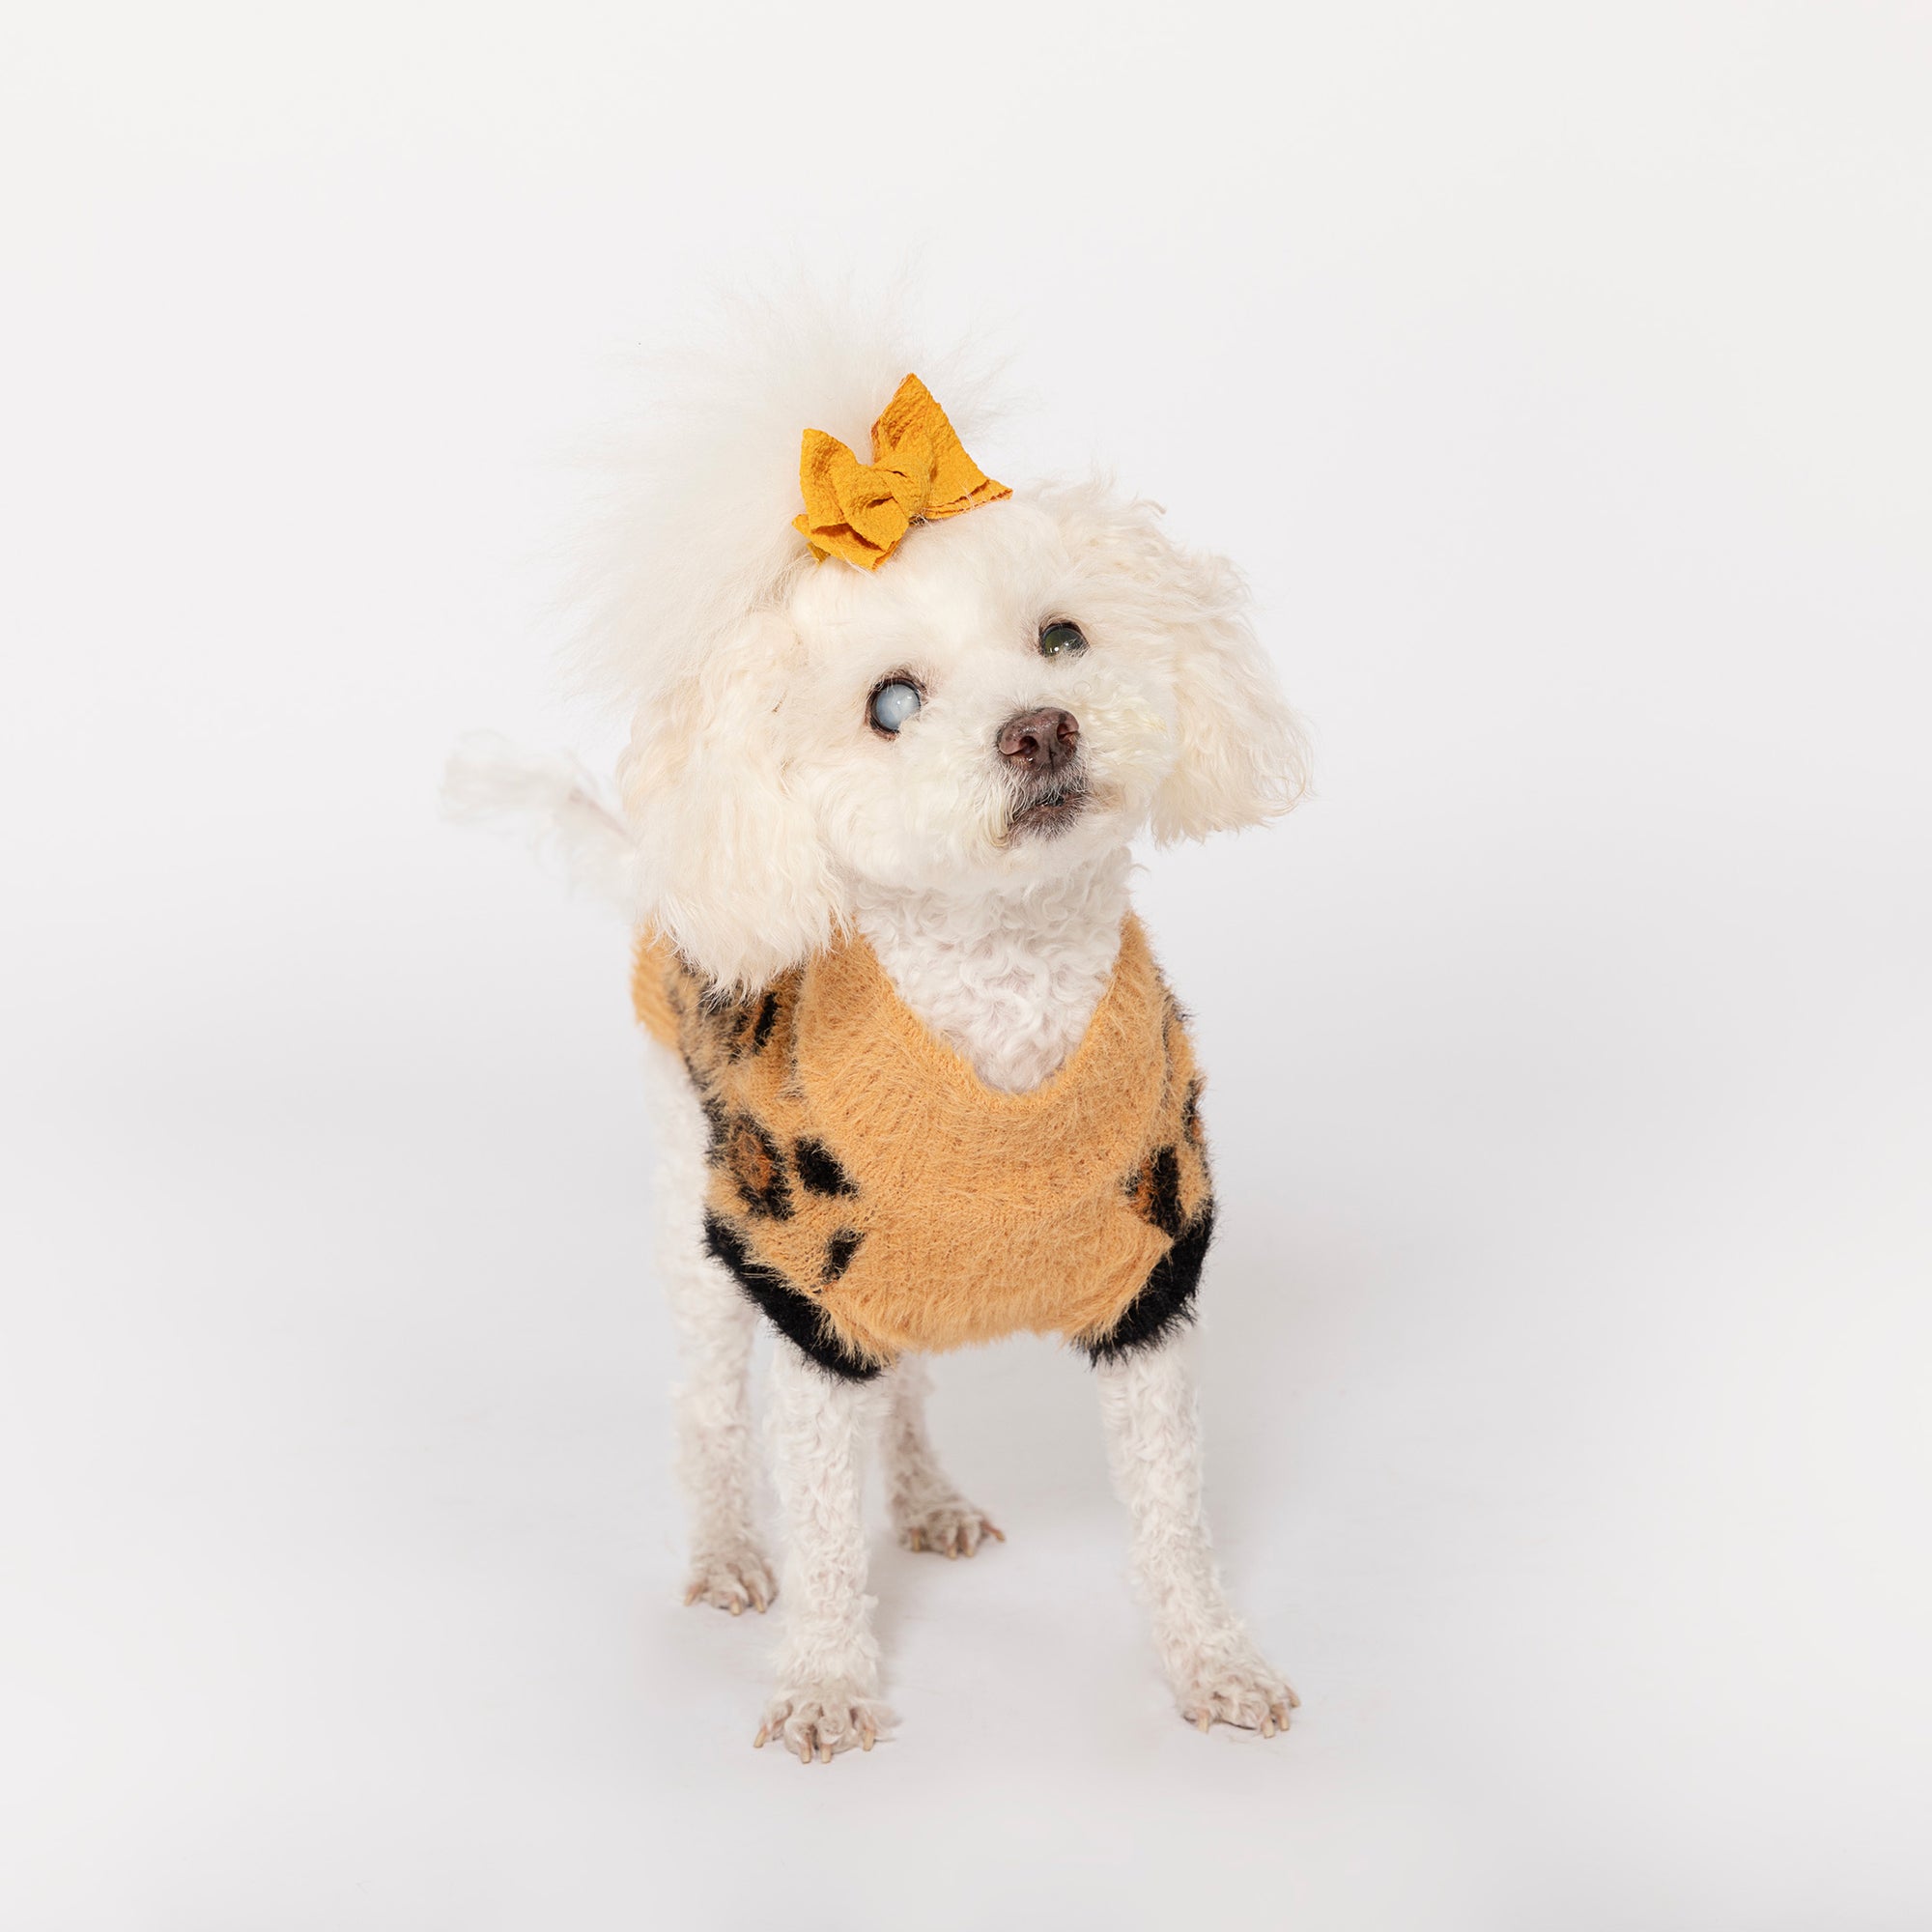 White poodle with a playful yellow bow on its head, wearing a tan and black leopard print sweater, looking curiously upwards, against a white background.